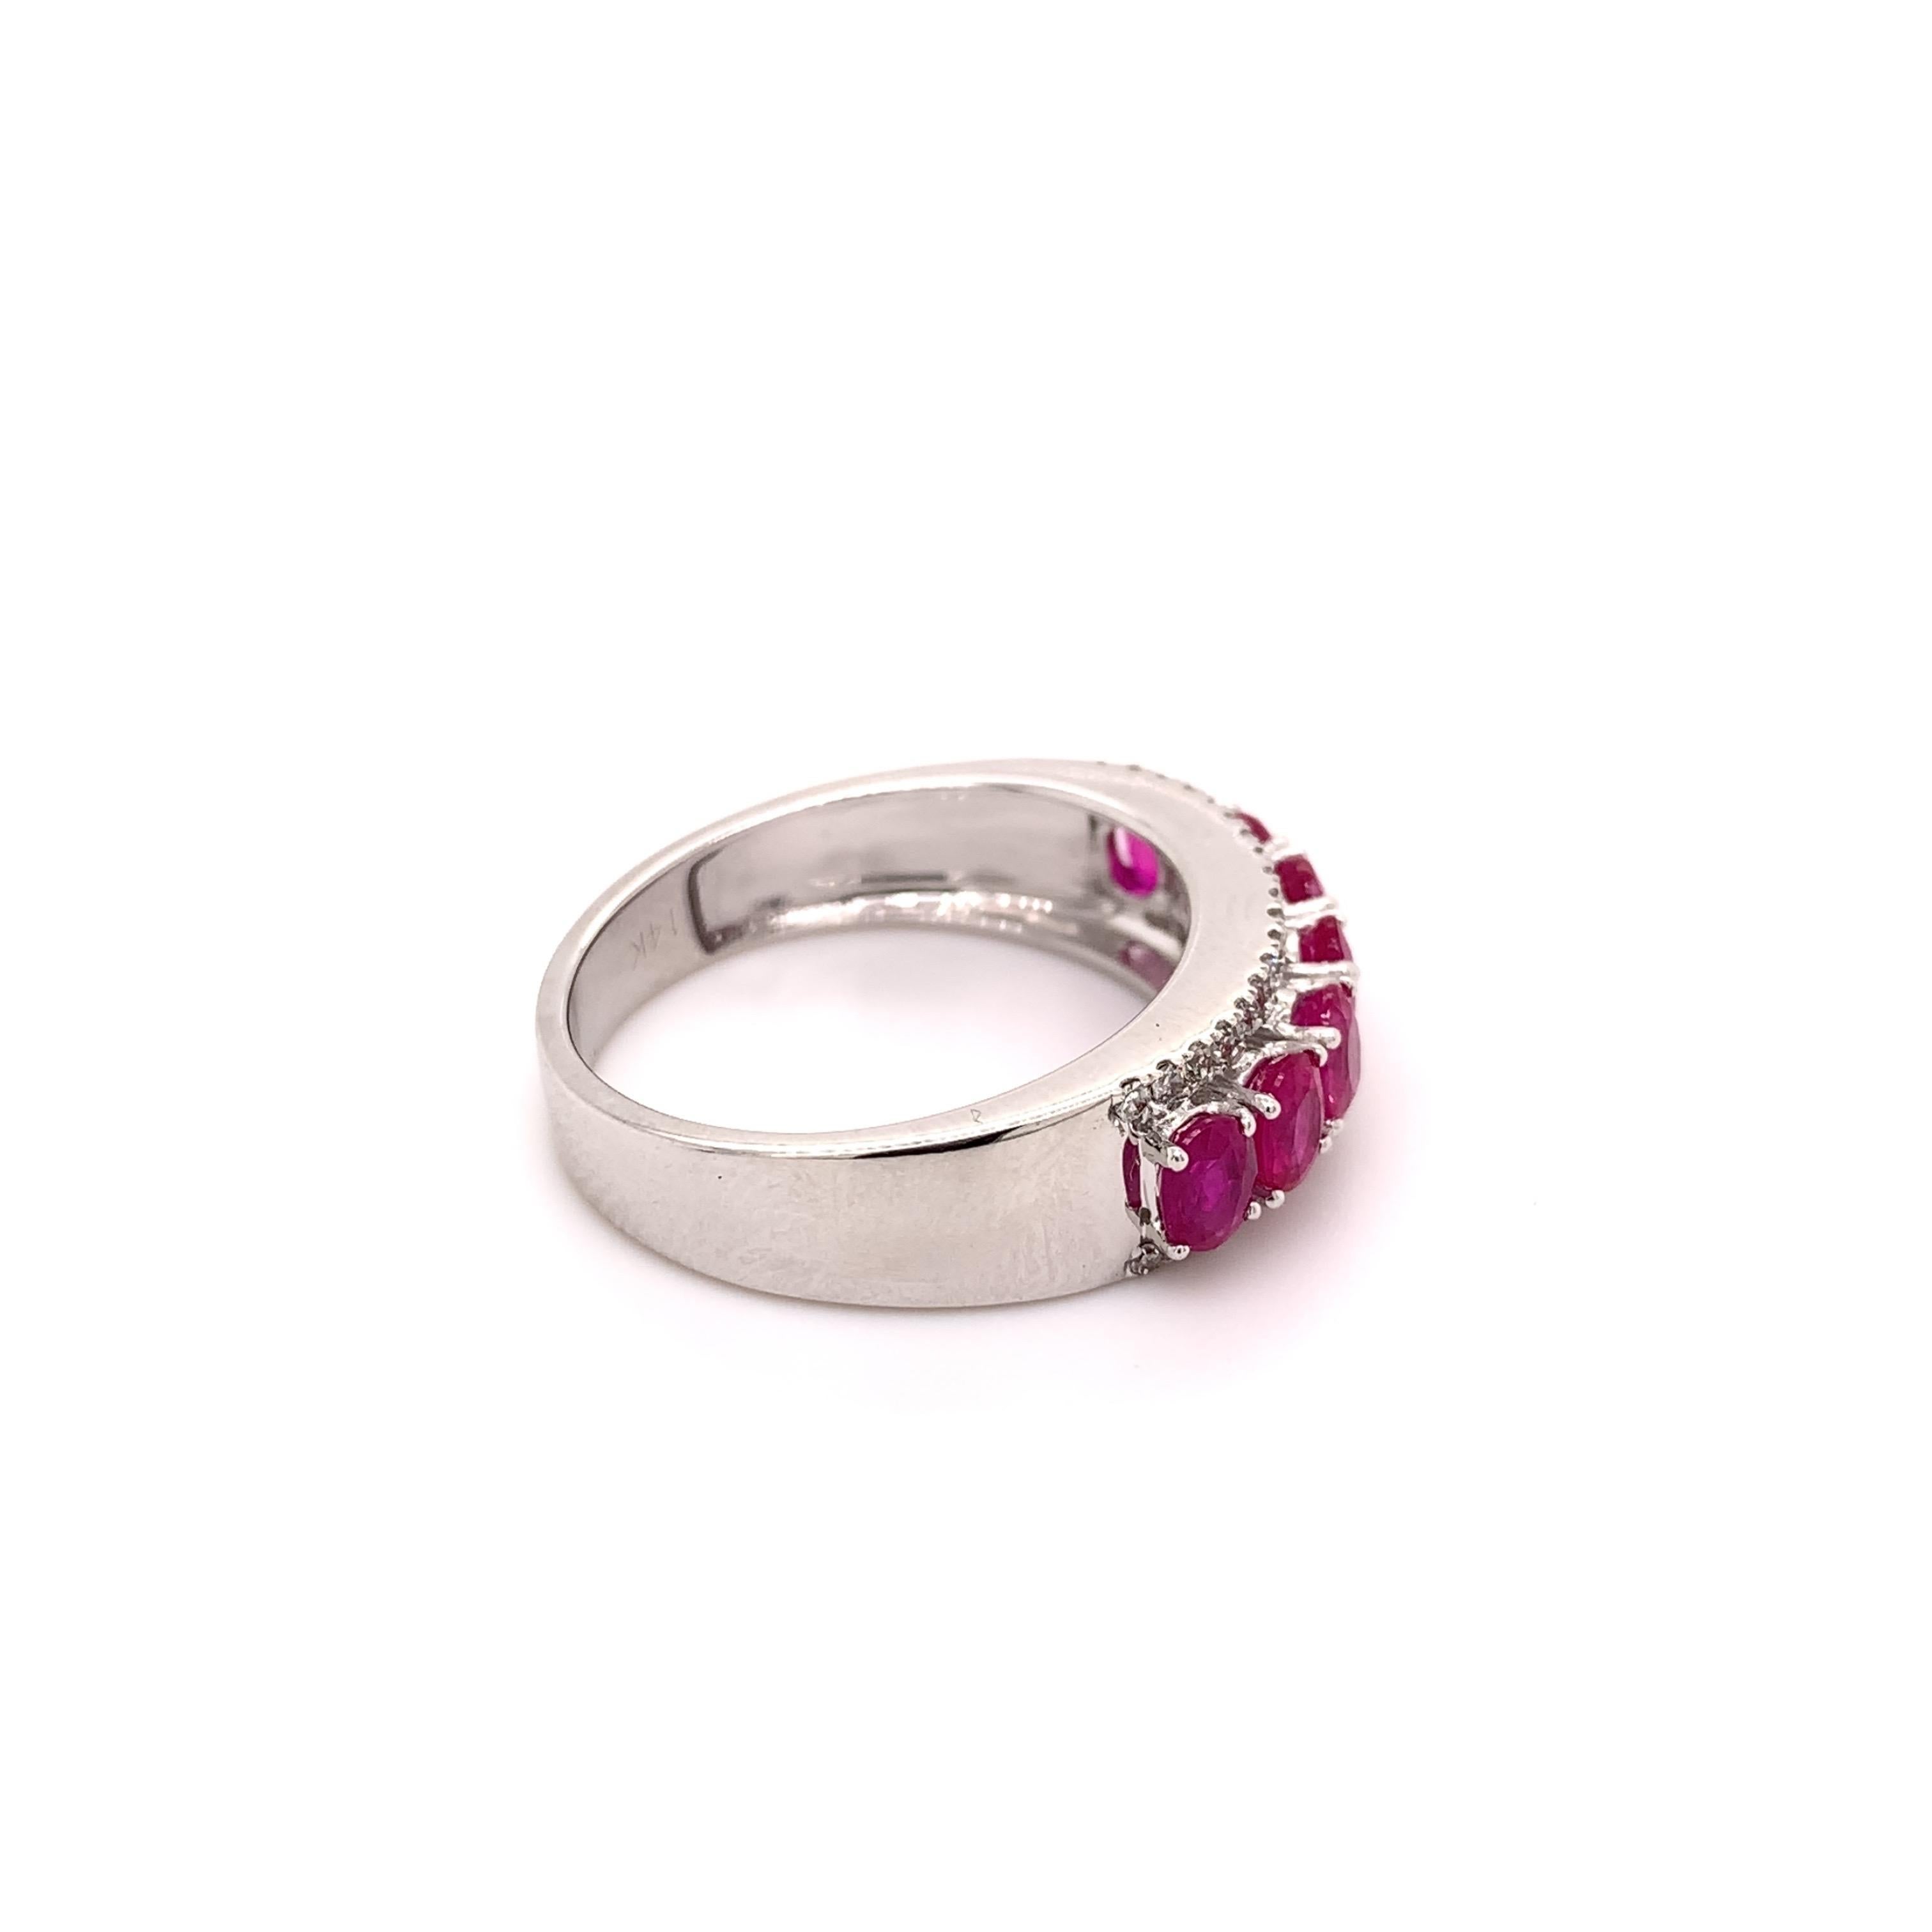 Elegant ruby diamond band ring. High brilliance, lively purplish-red oval faceted 1.79 carats natural rubies mounted in high profile open basket with bead prongs, accented with two rows of round brilliant cut diamonds.  Handcrafted design set in